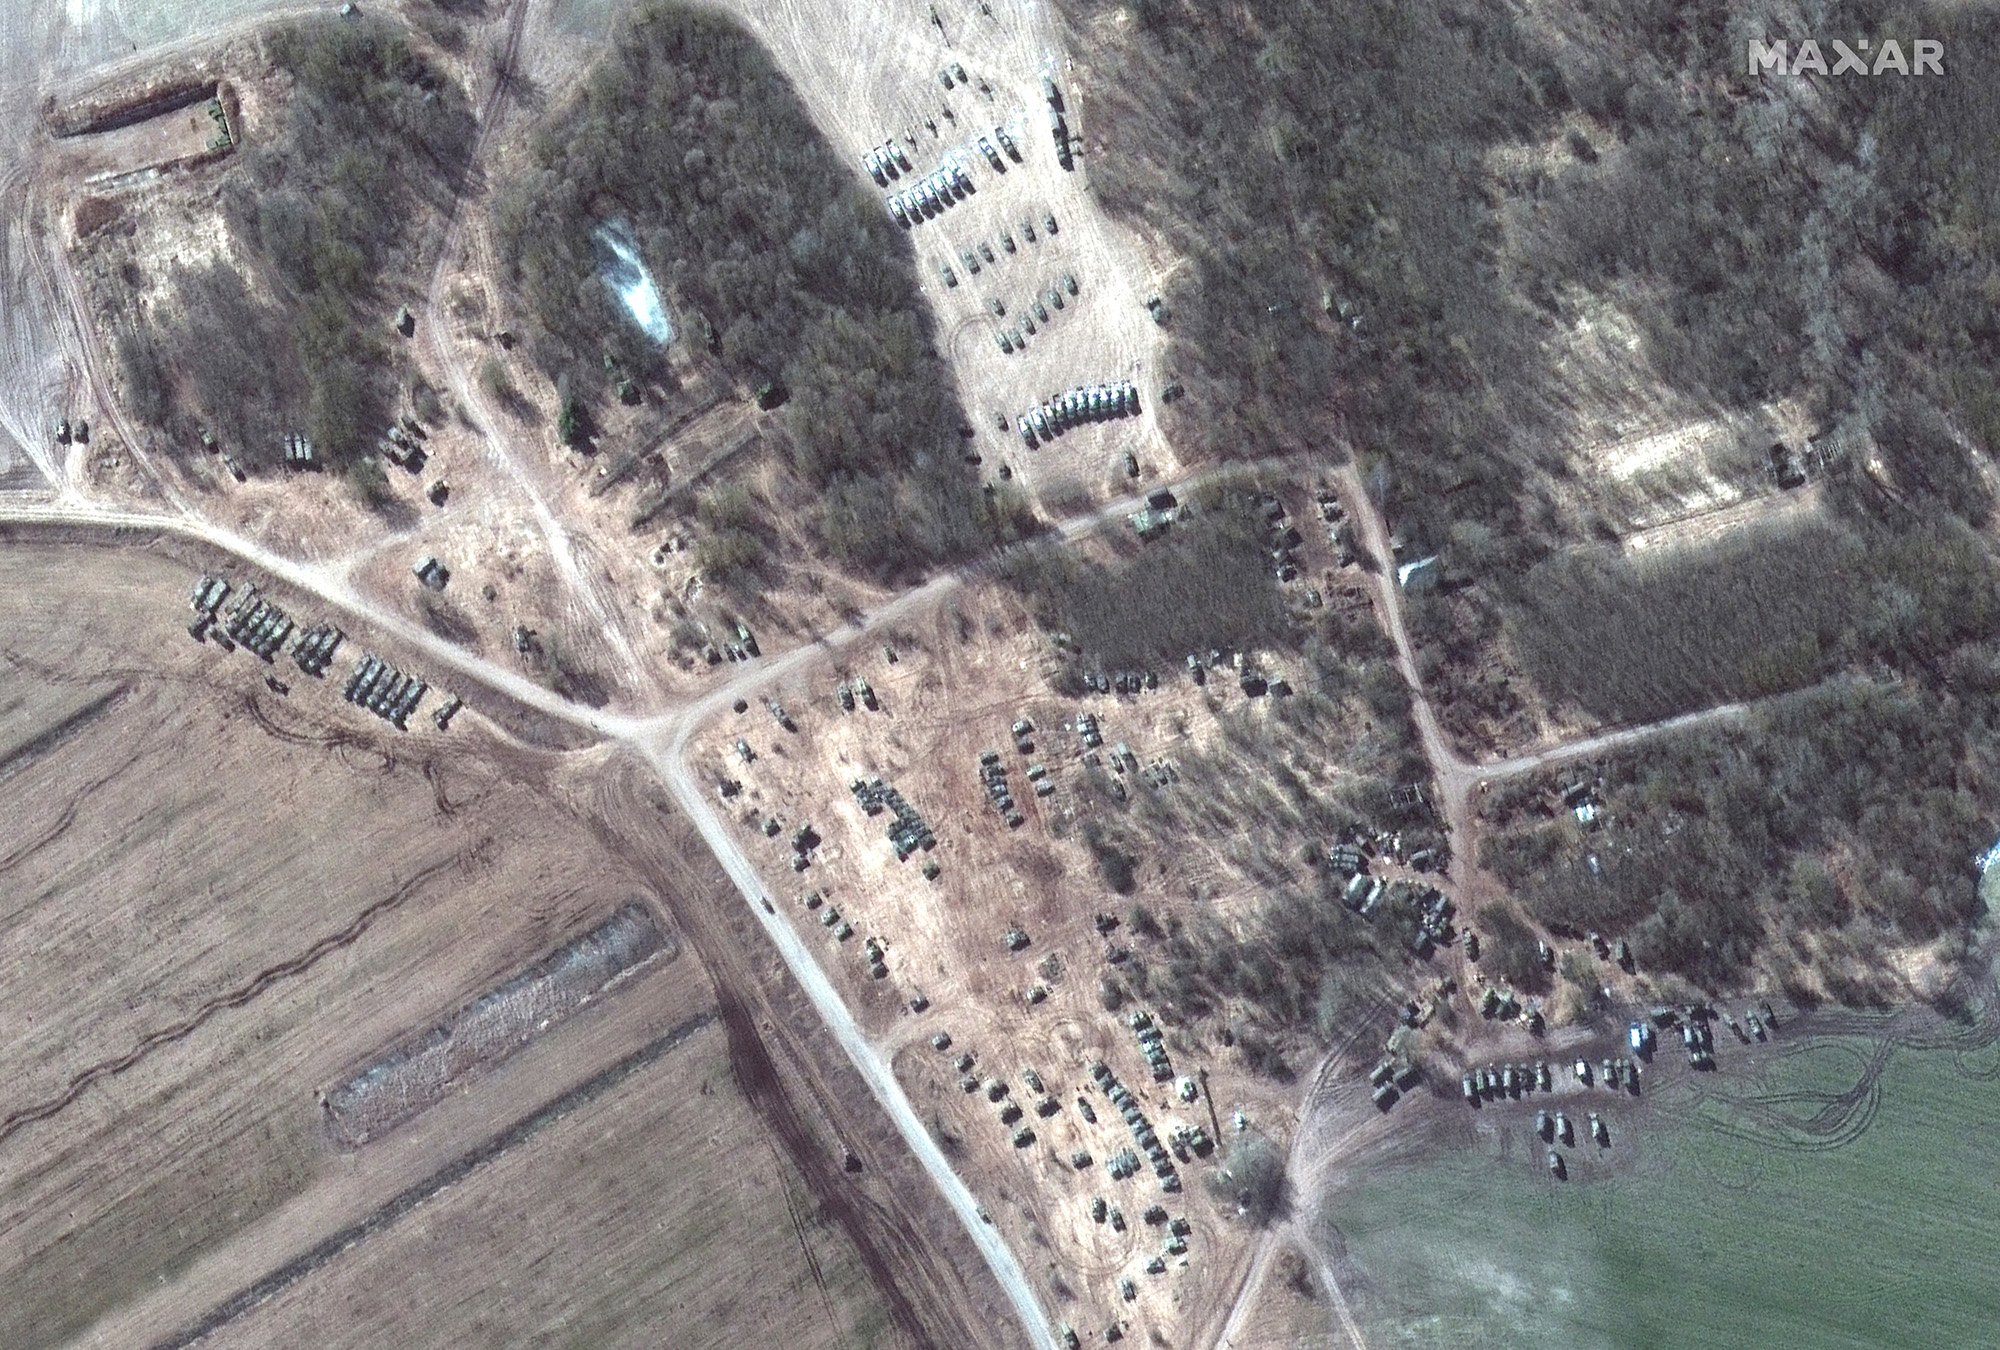 Satellite image showing Russian ground forces in Dublin, Belarus, on March 18.